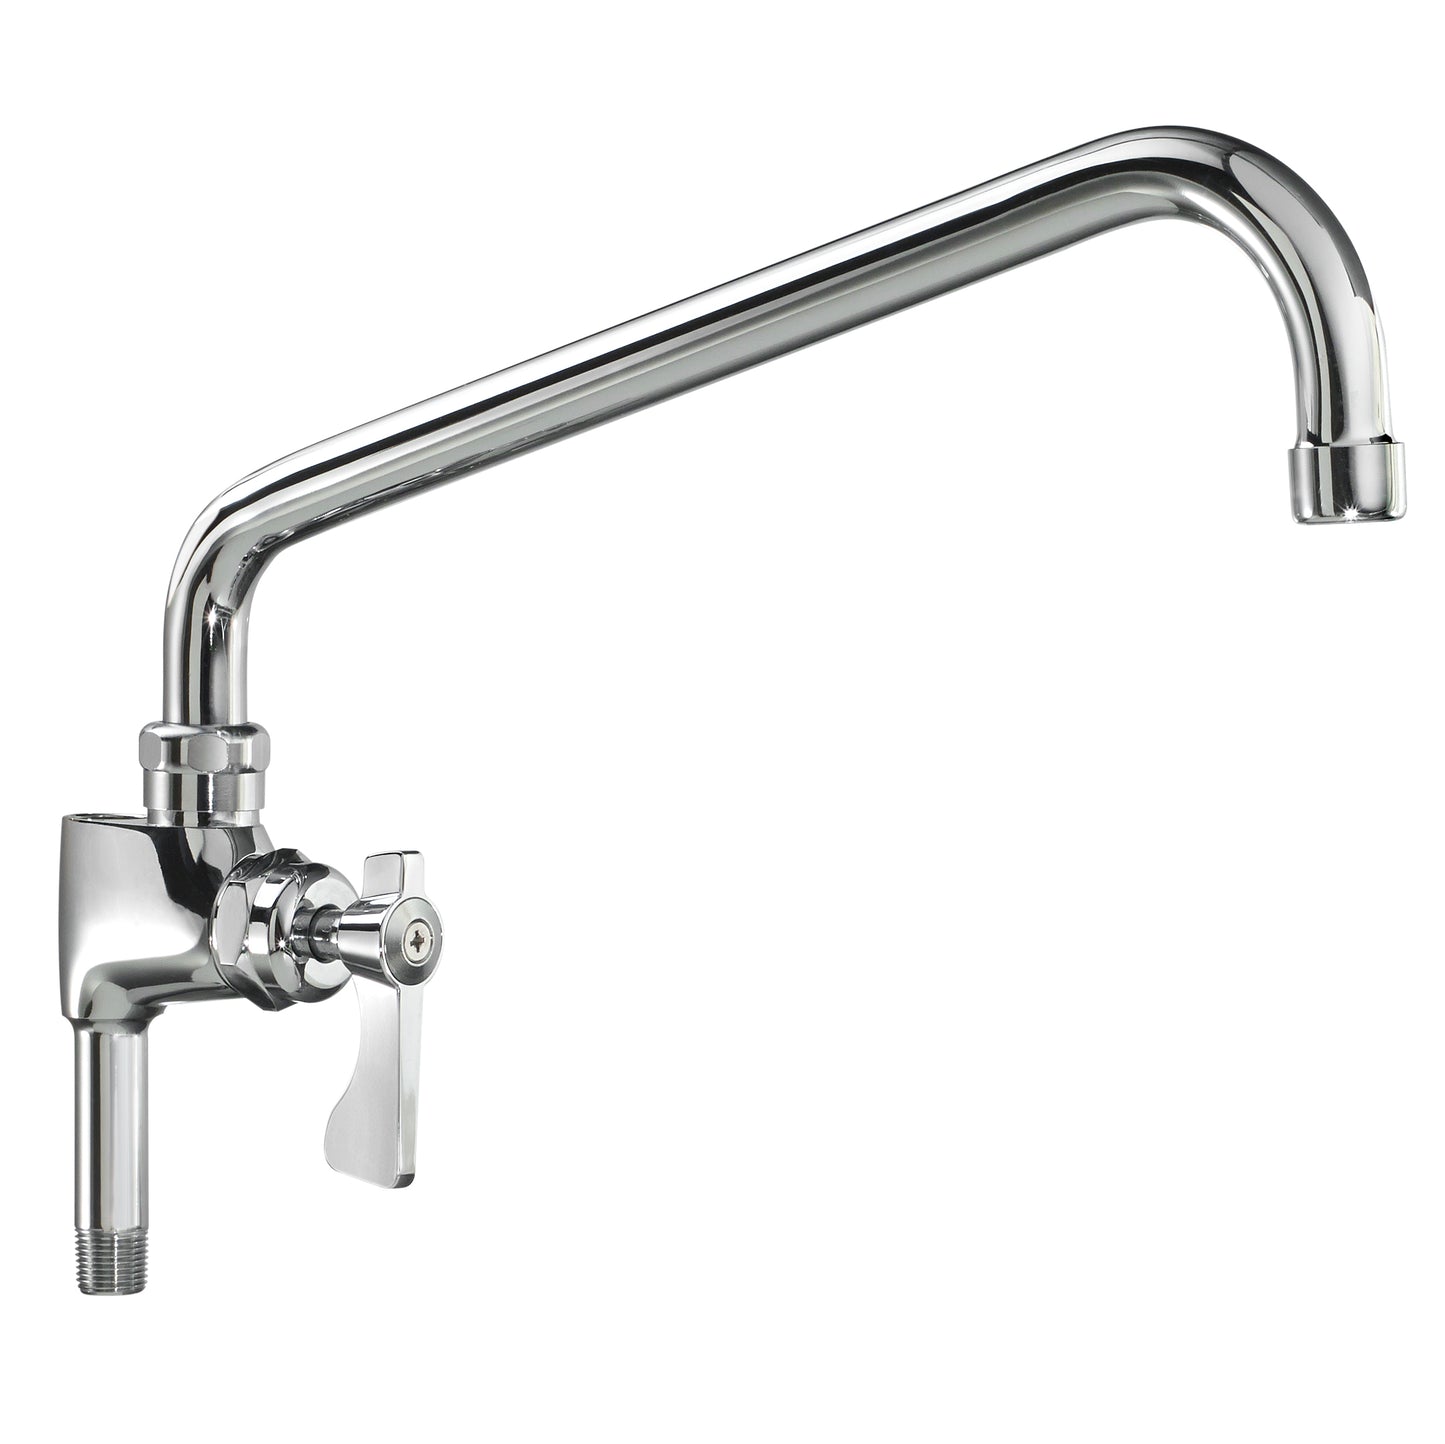 Krowne 21-140L. Royal Series Add-on Faucet with 14" Spout for  Pre-rinse.